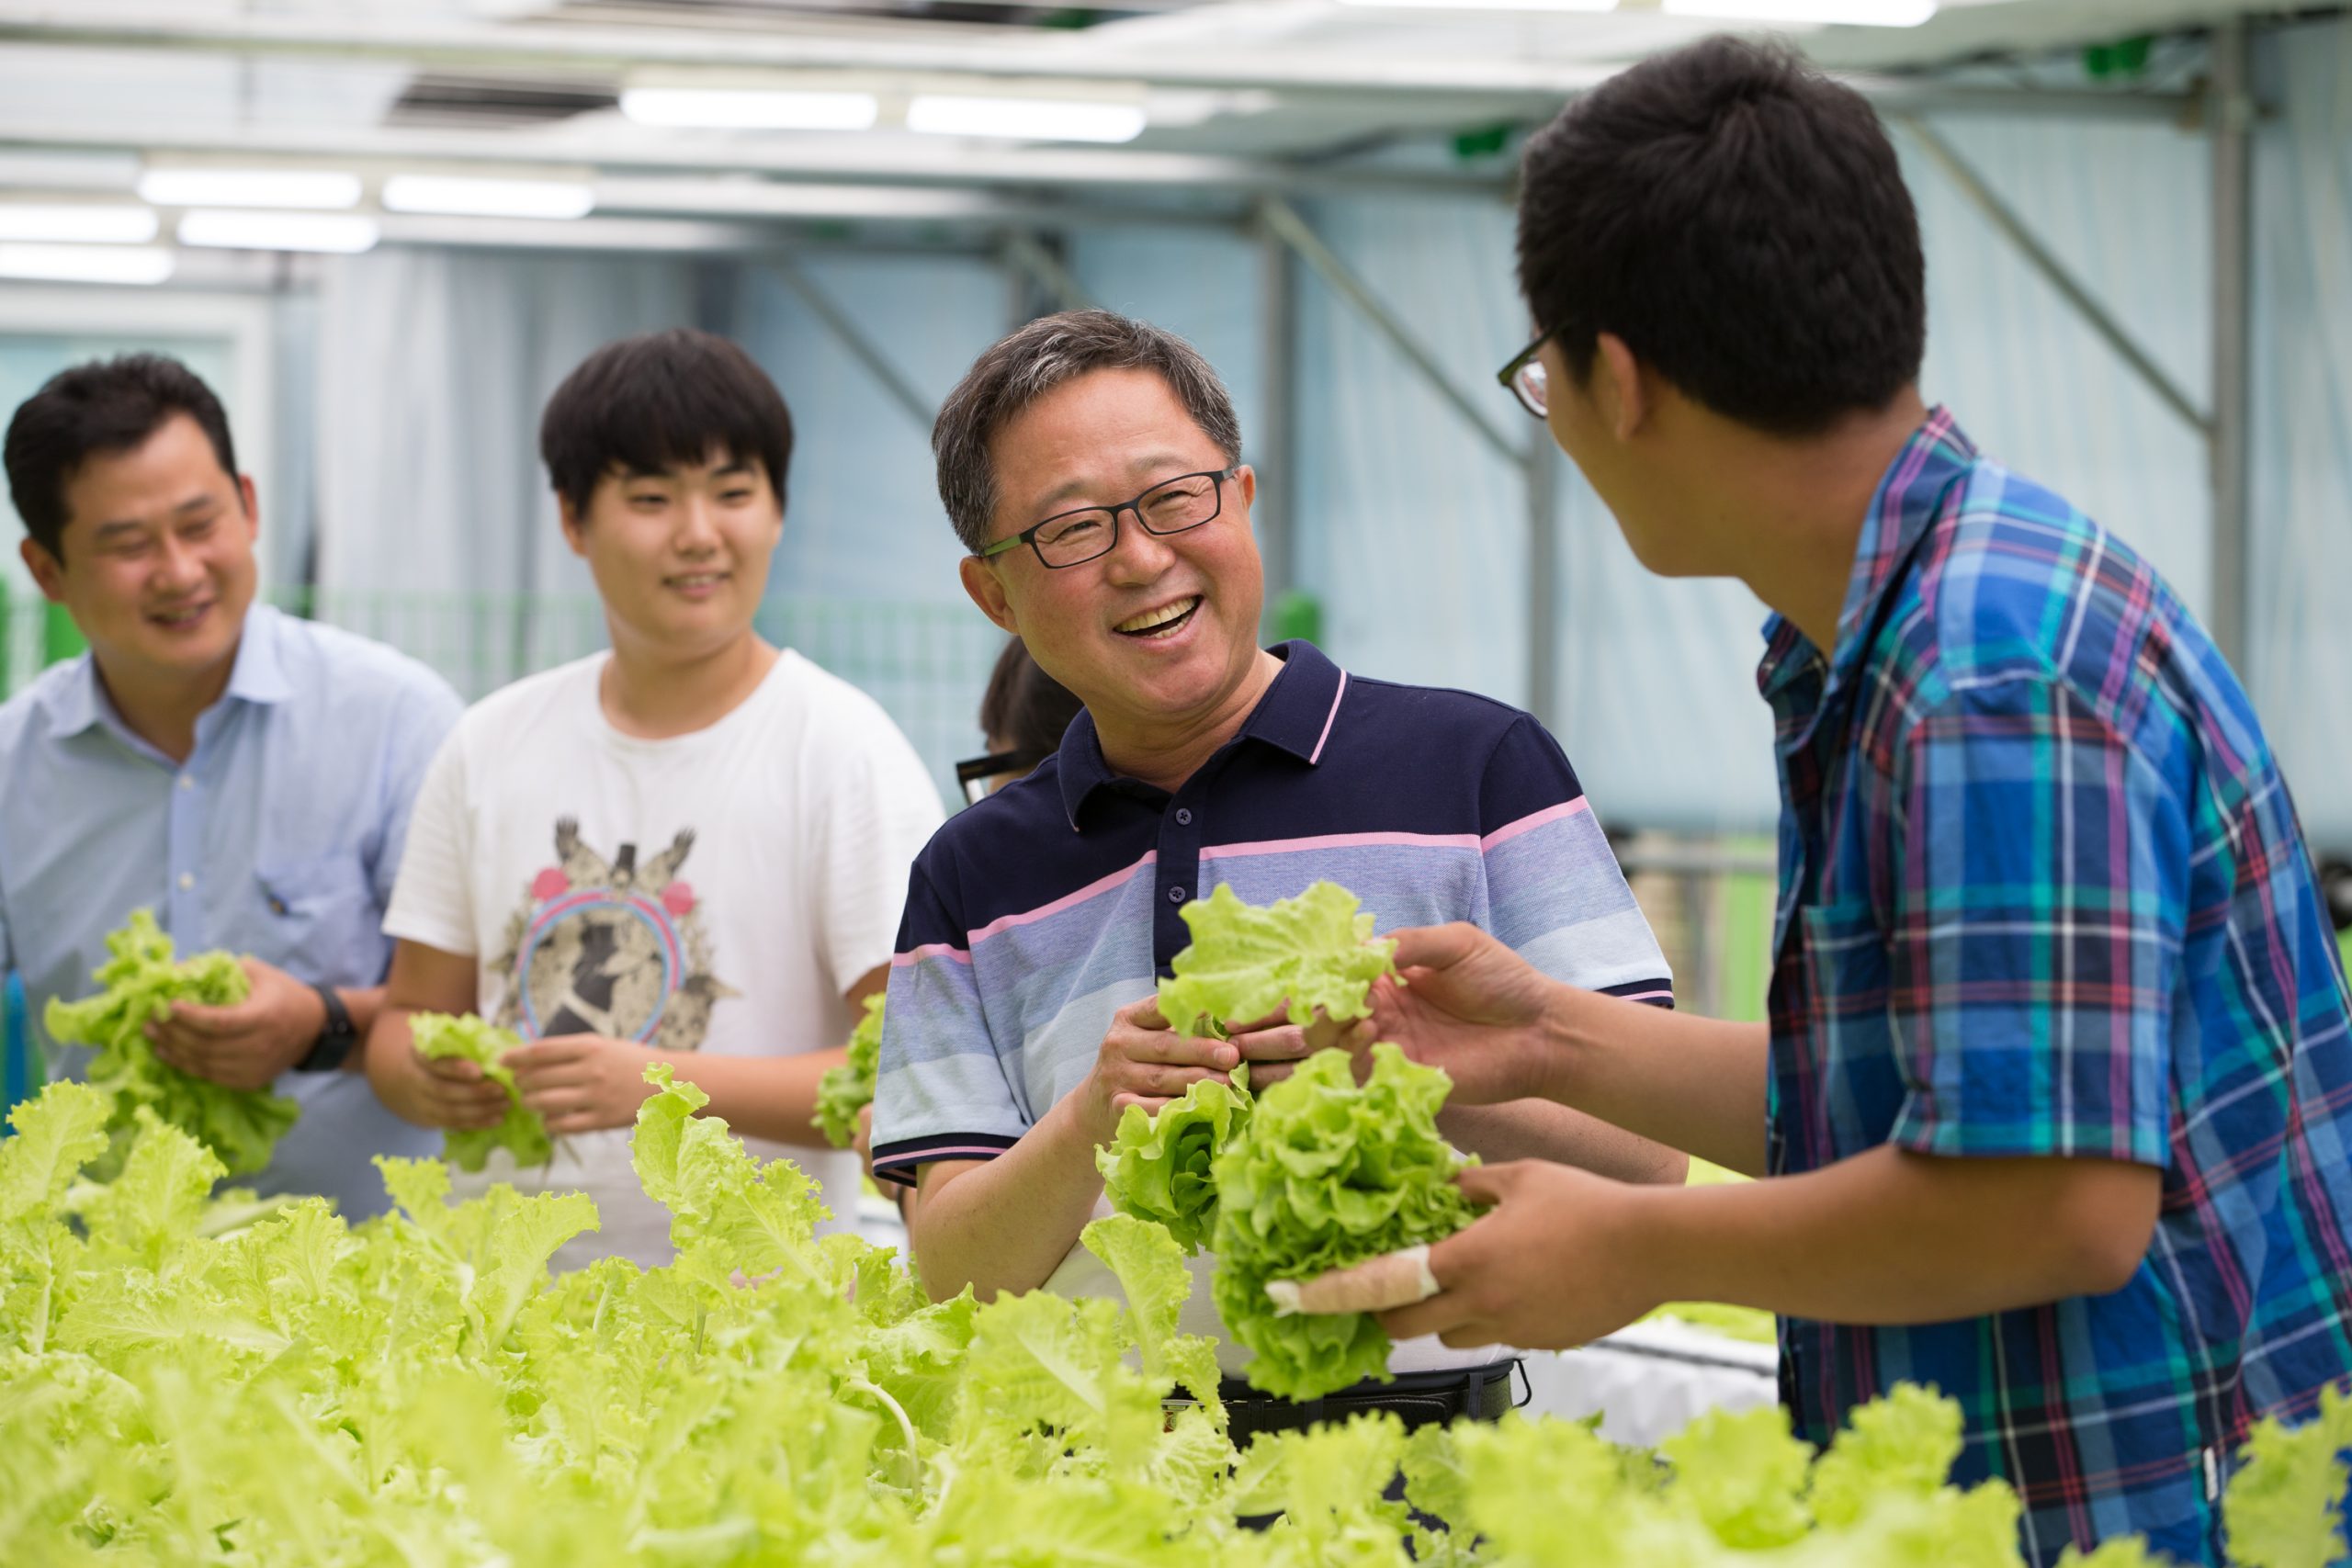 Rotarian laughing with three students while picking lettuce.